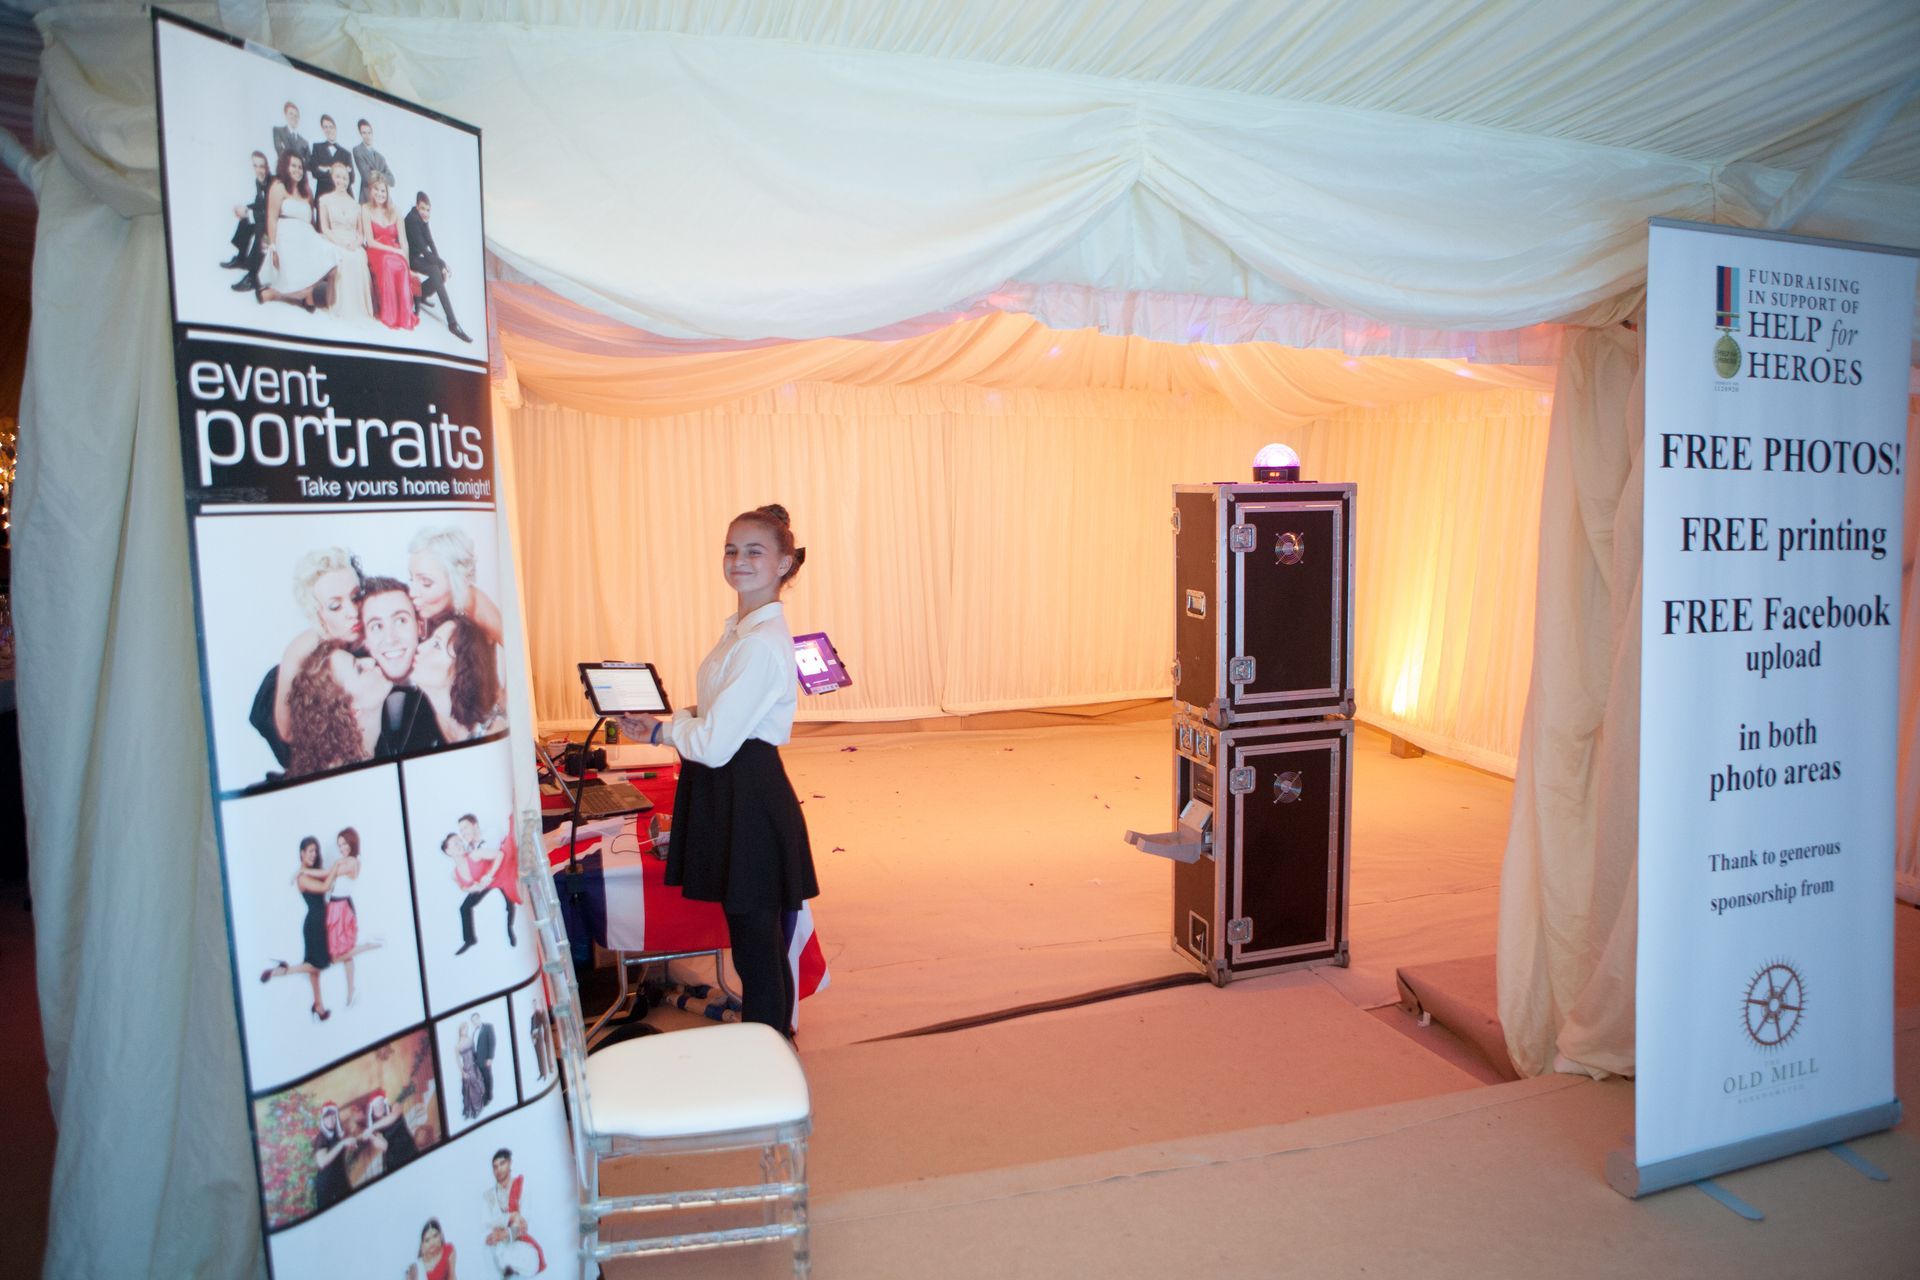 How PR and Marketing photography concepts can help your event